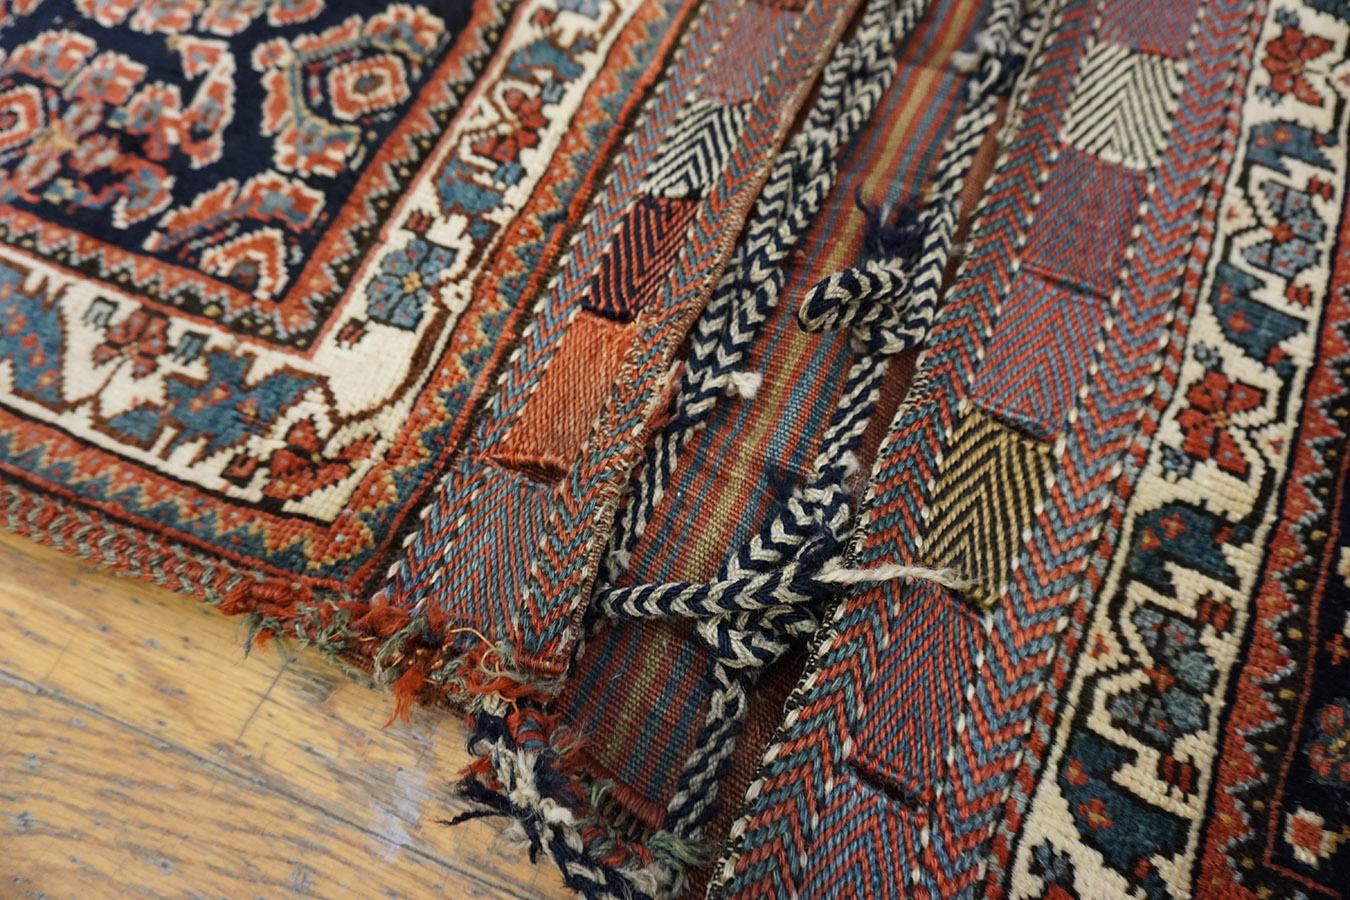 Hand-Knotted Late 19th Century S. Persian Afshar Saddle Bag Carpet ( 2' x 4'2